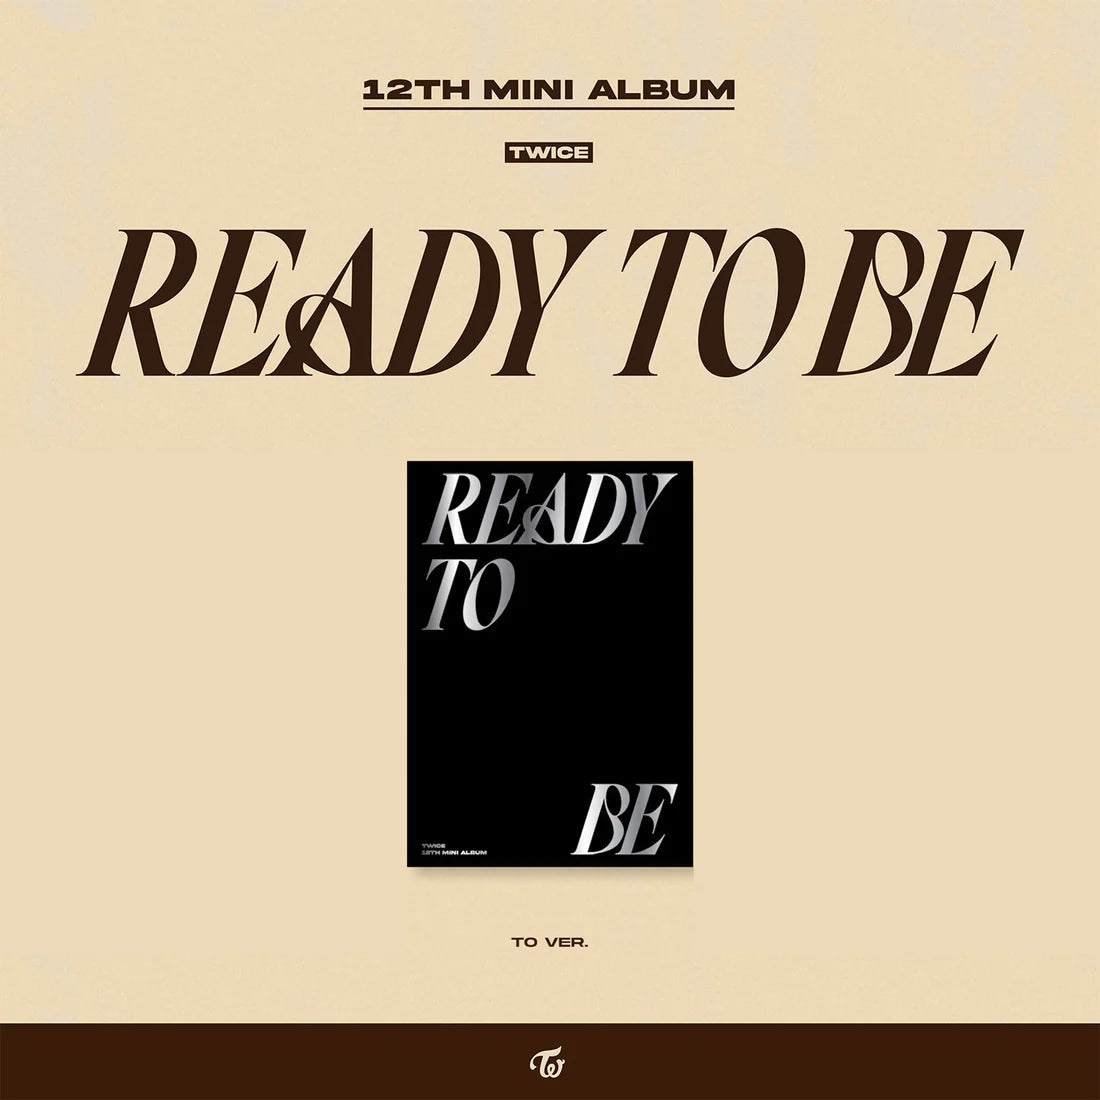 TWICE returns with new album 'Ready To Be' and 'Set Me Free' music